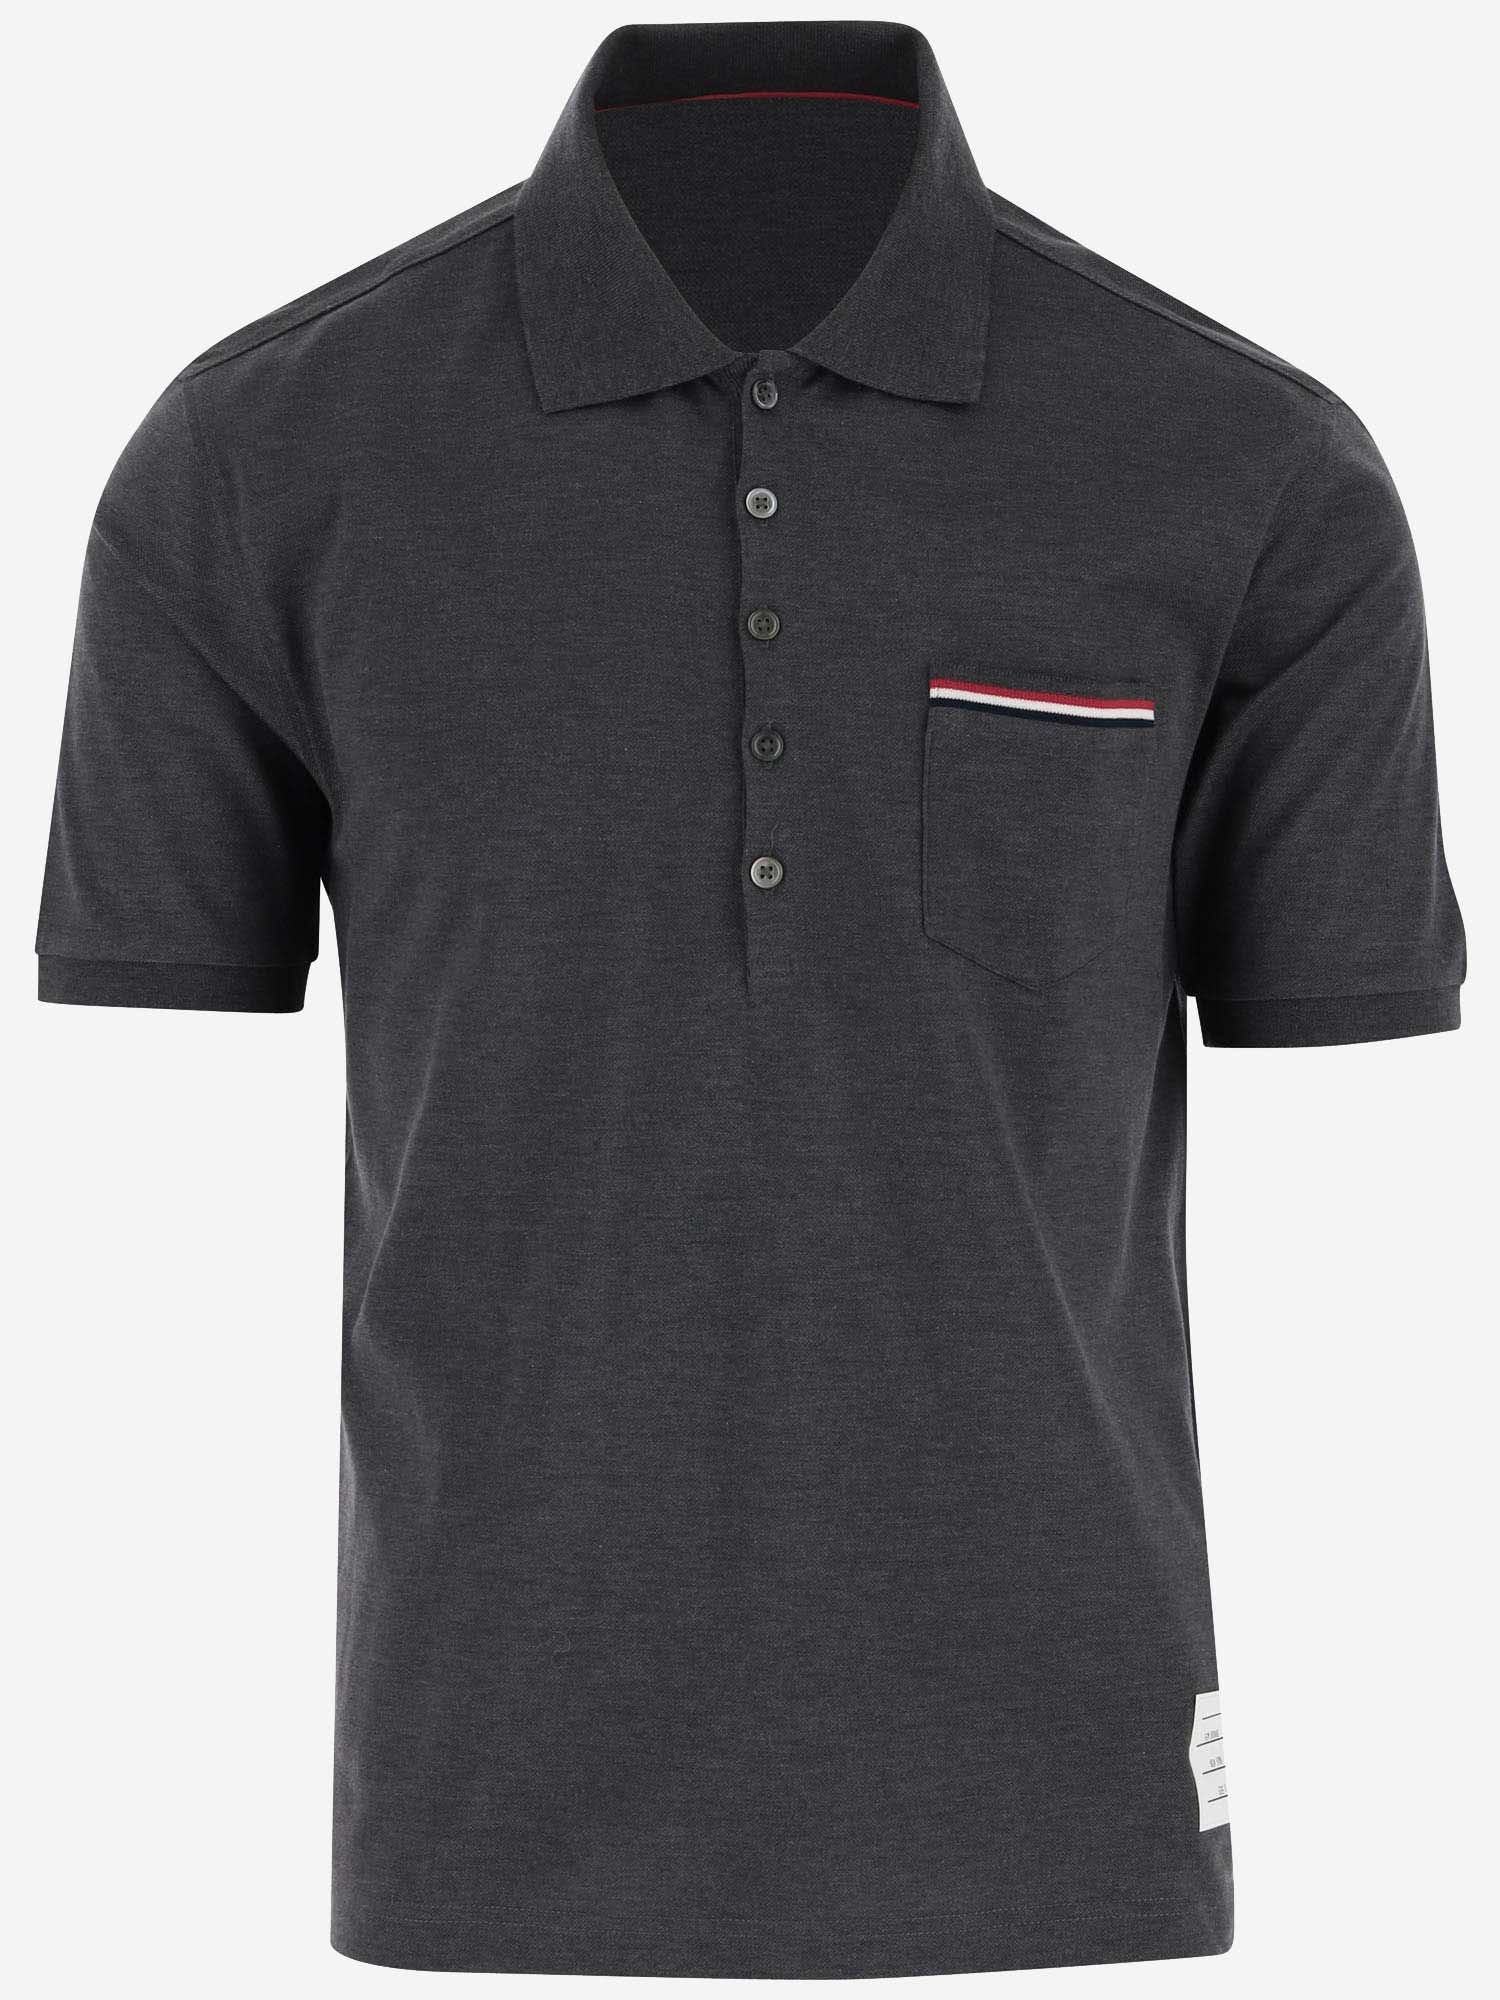 THOM BROWNE COTTON POLO SHIRT WITH TRICOLOR PATTERN